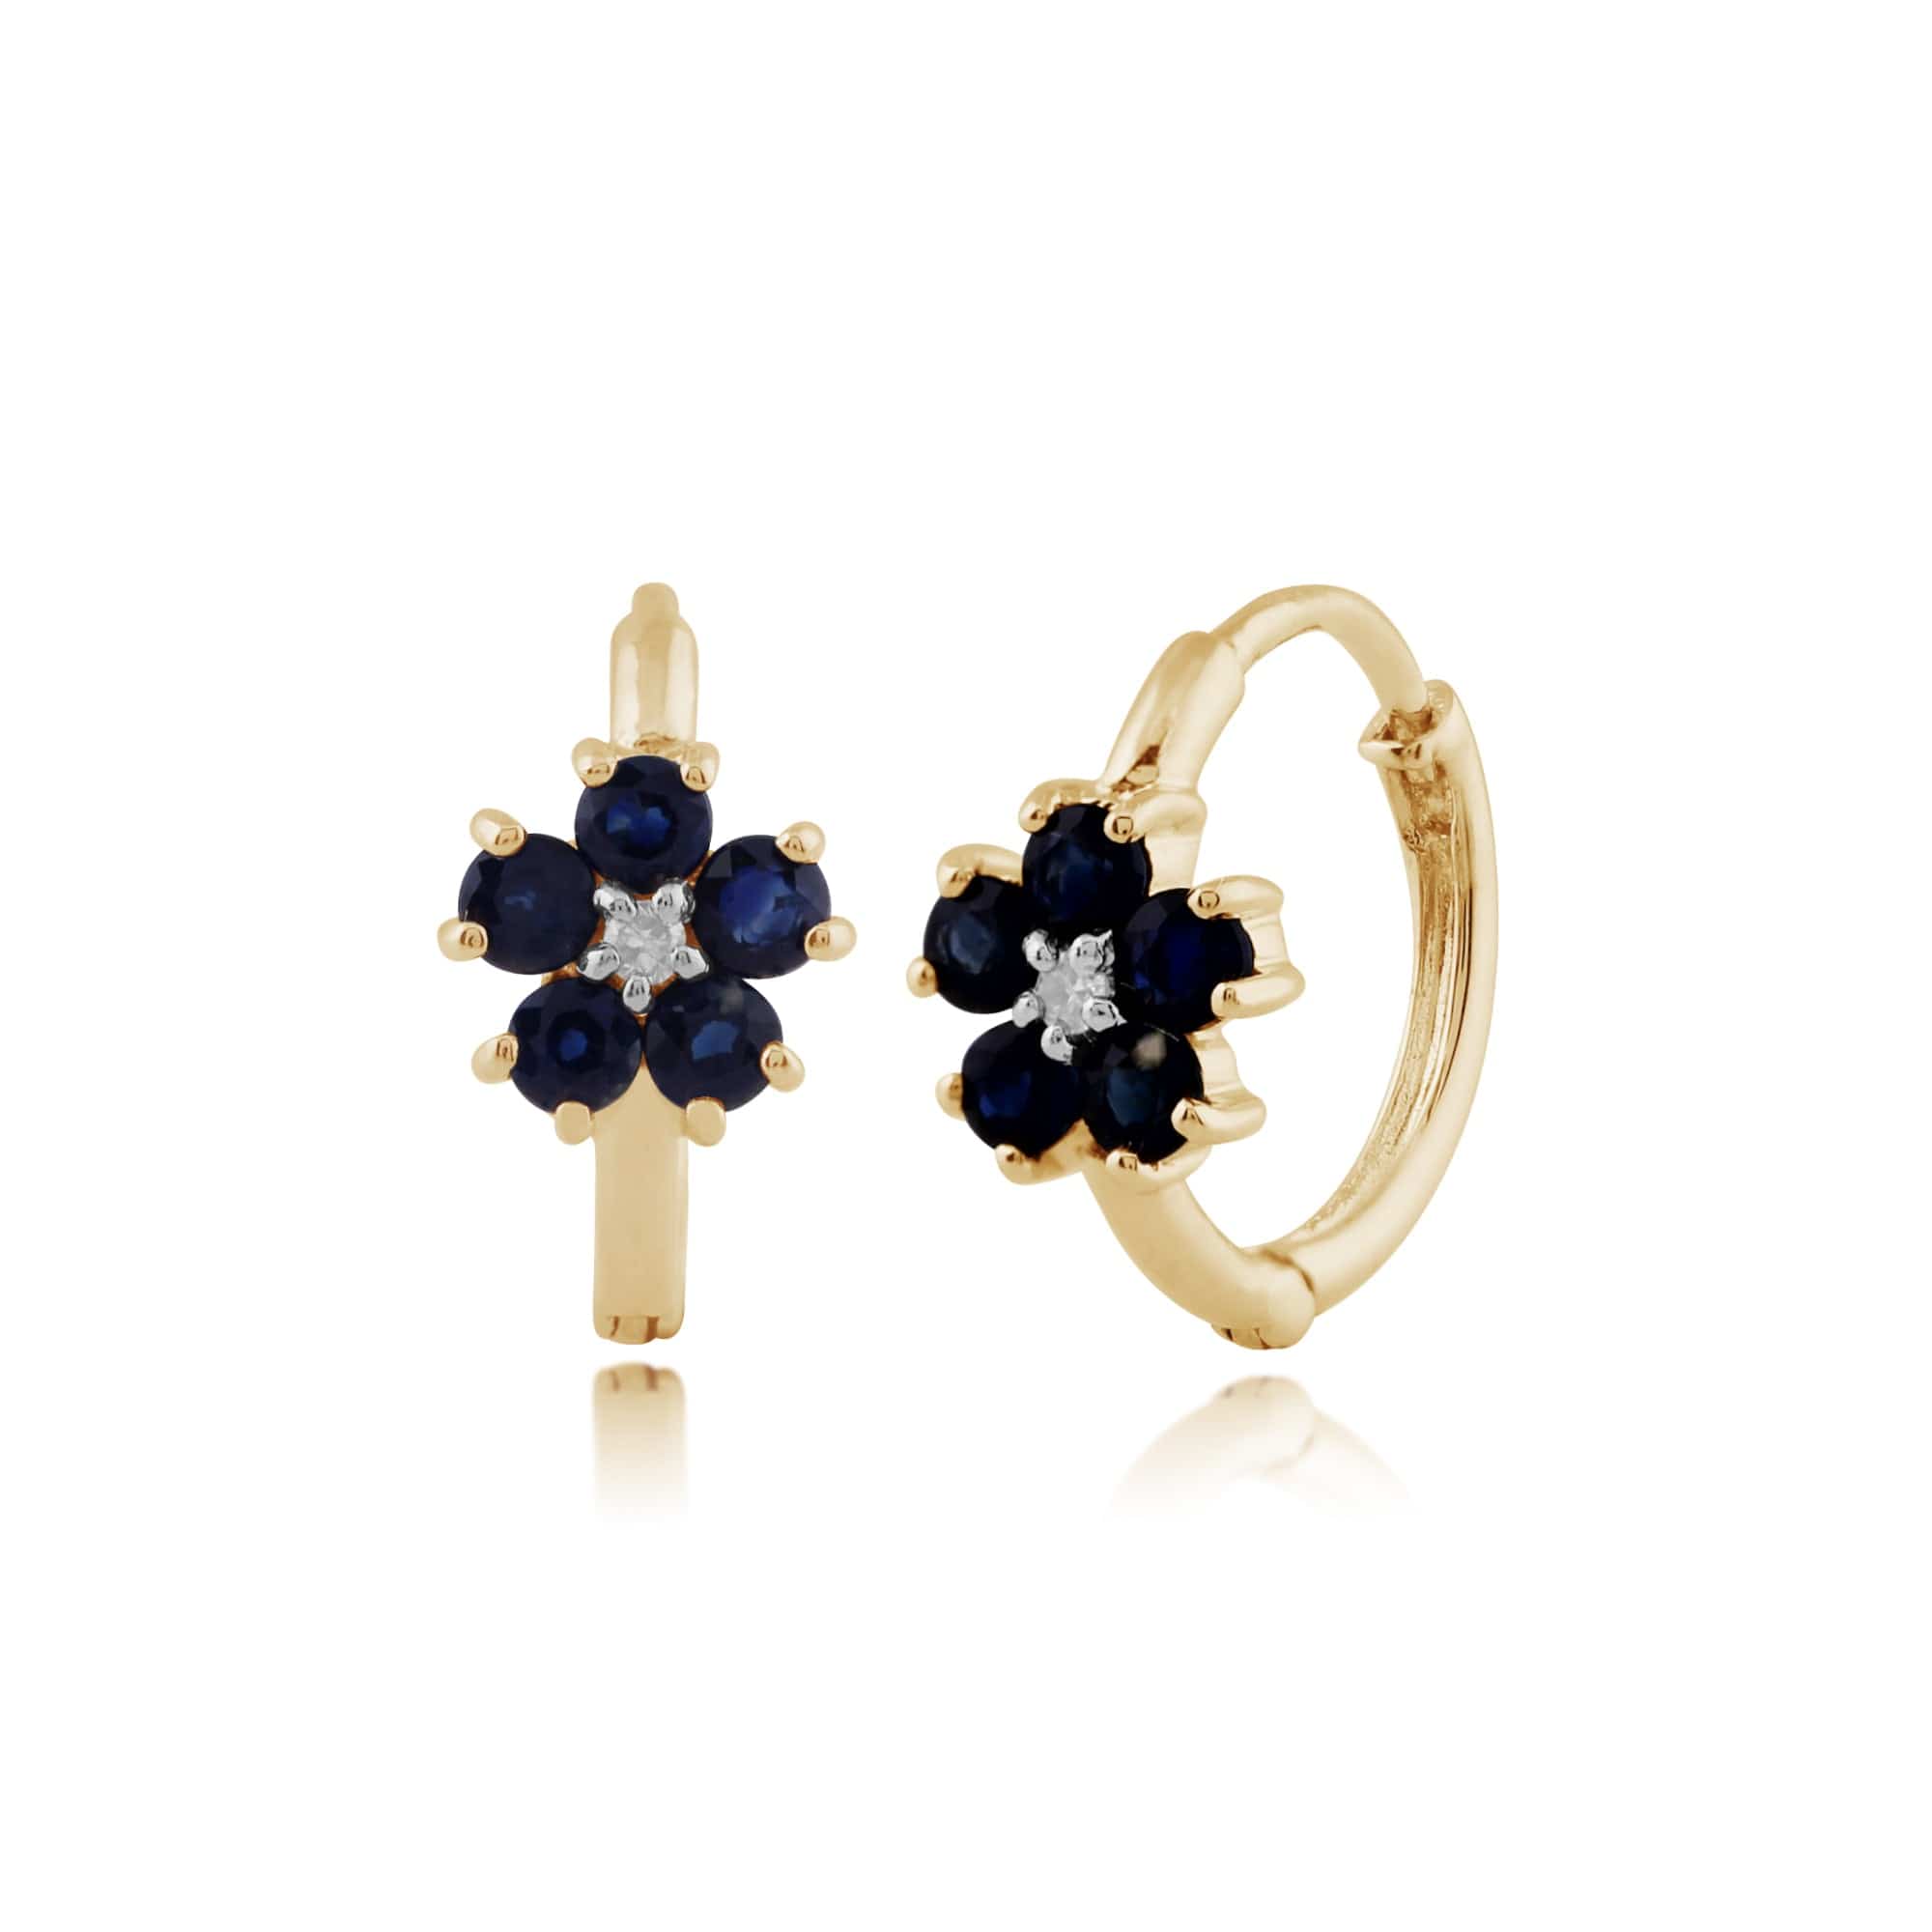 Floral Round Sapphire & Diamond Hoop Earrings in 9ct Yellow Gold